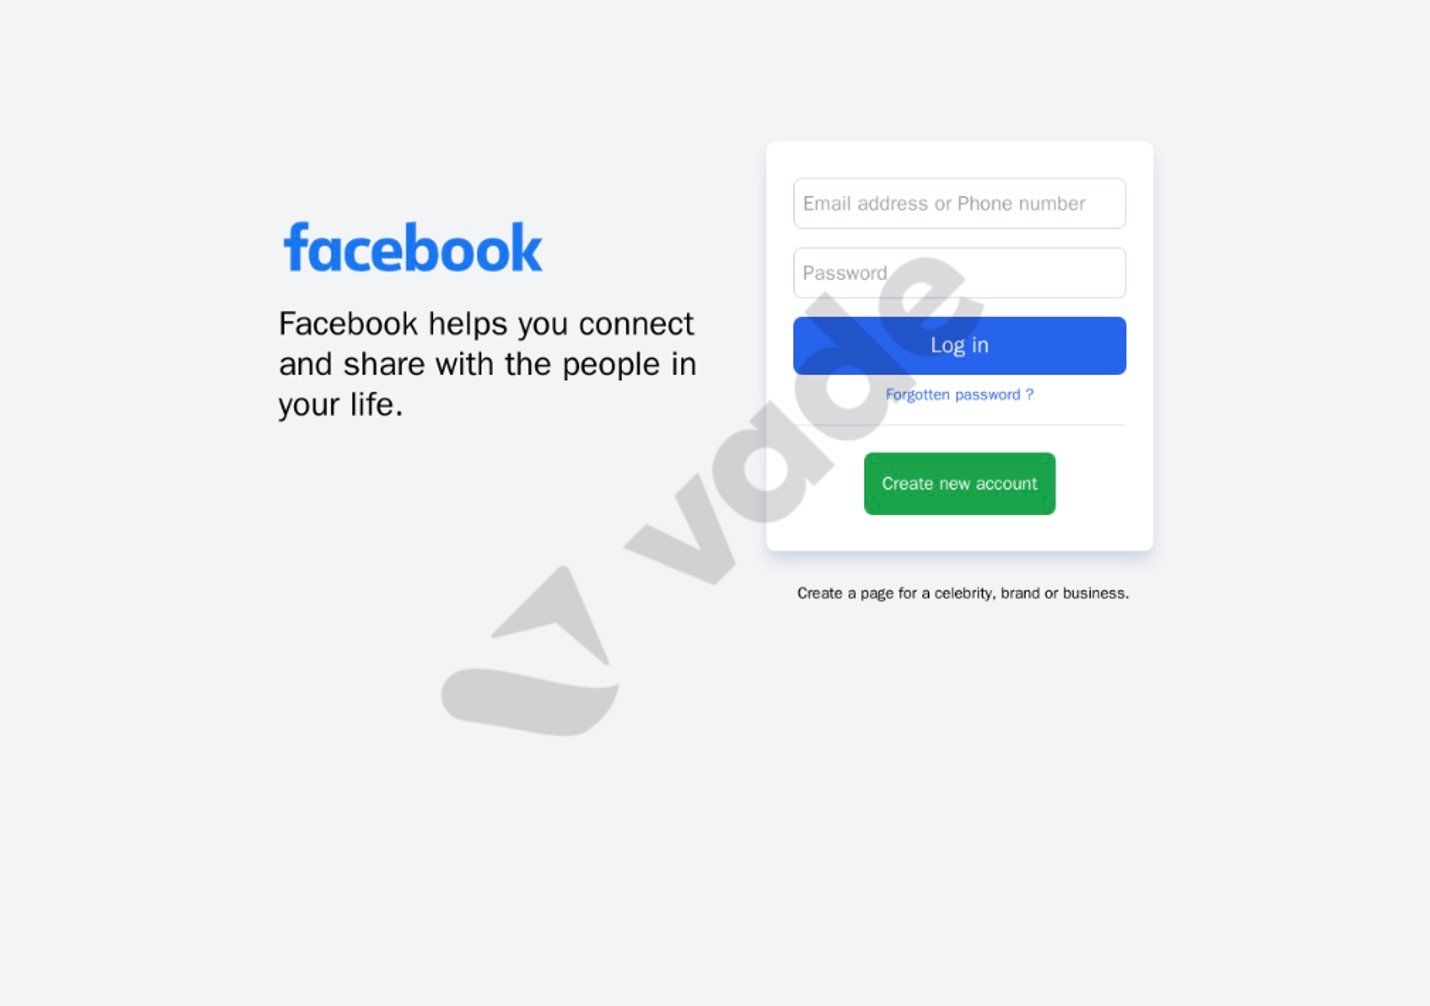 Facebook phishing page detected by Vade